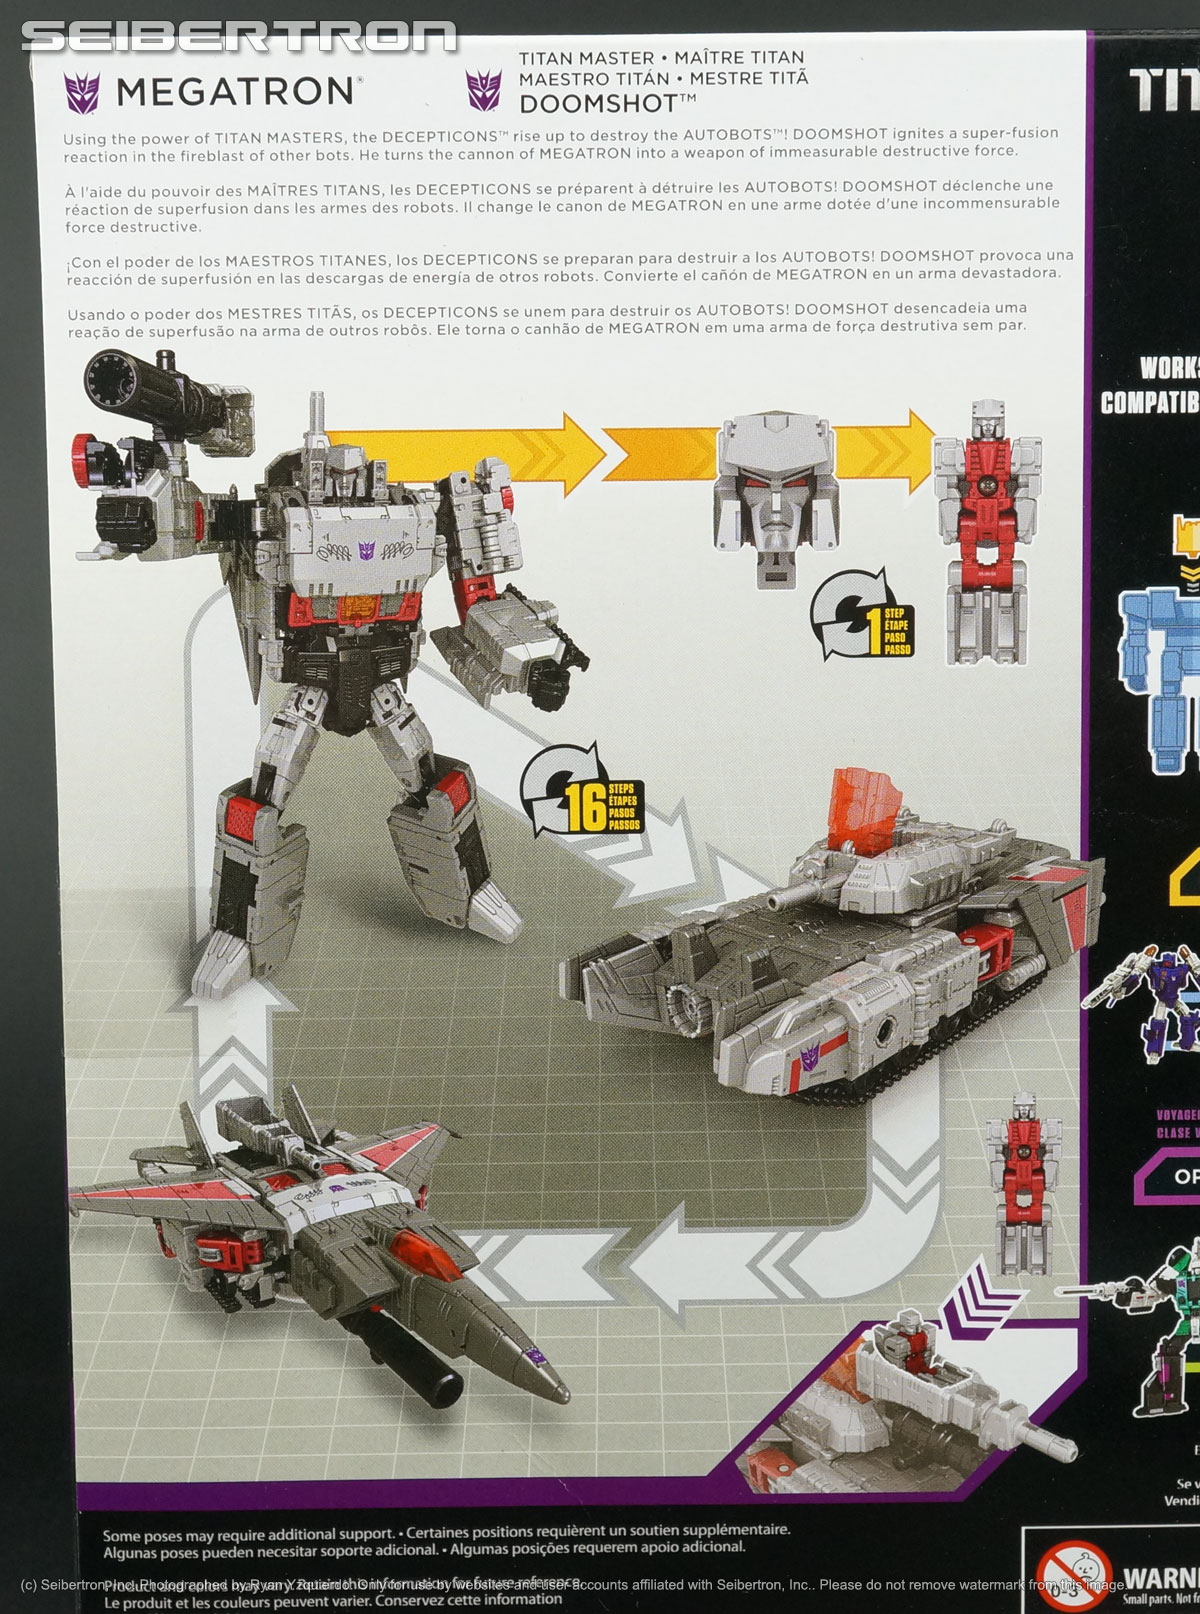 Transformers, Gobots, Masters of the Universe, Teenage Mutant Ninja Turtles, Shopkins, Comic Books, and other items items listings from Seibertron.com: Voyager Class MEGATRON Transformers Titans Return Generations New 2017